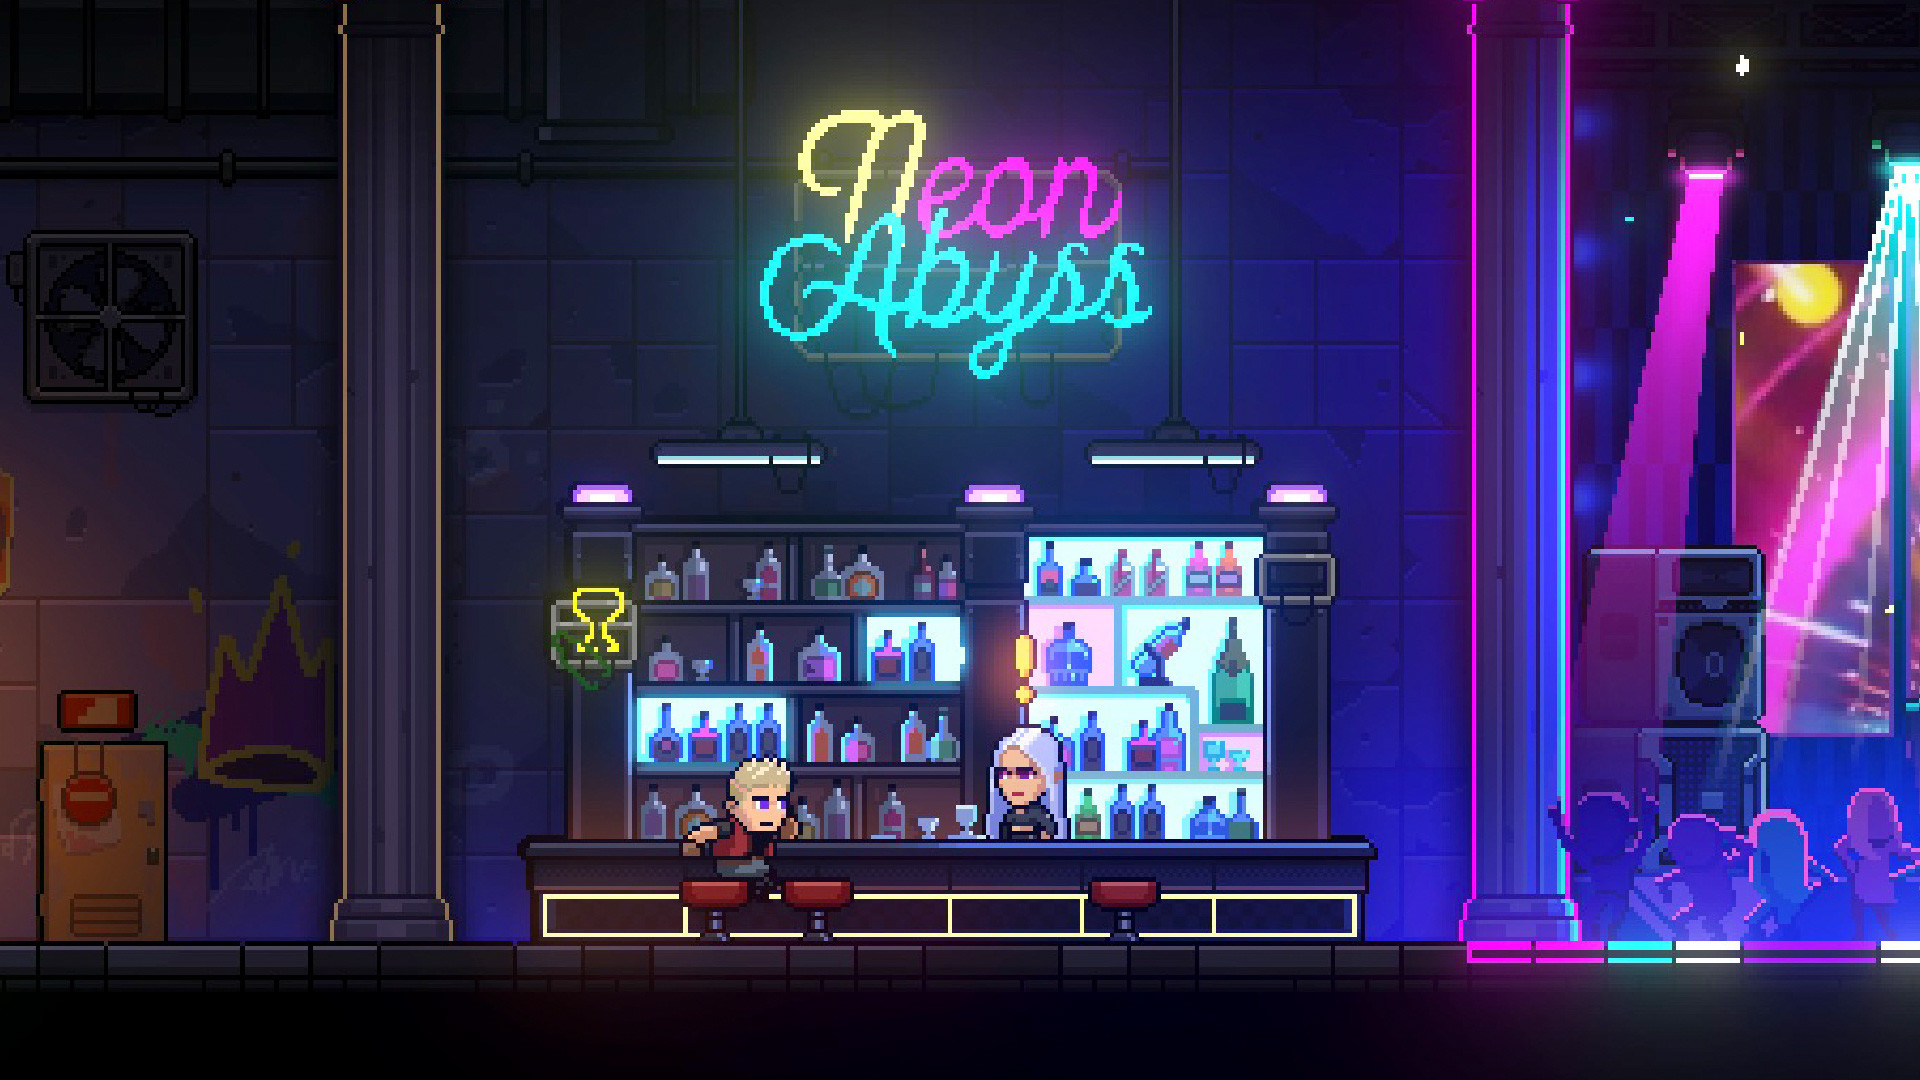 download the new version for mac Neon Abyss